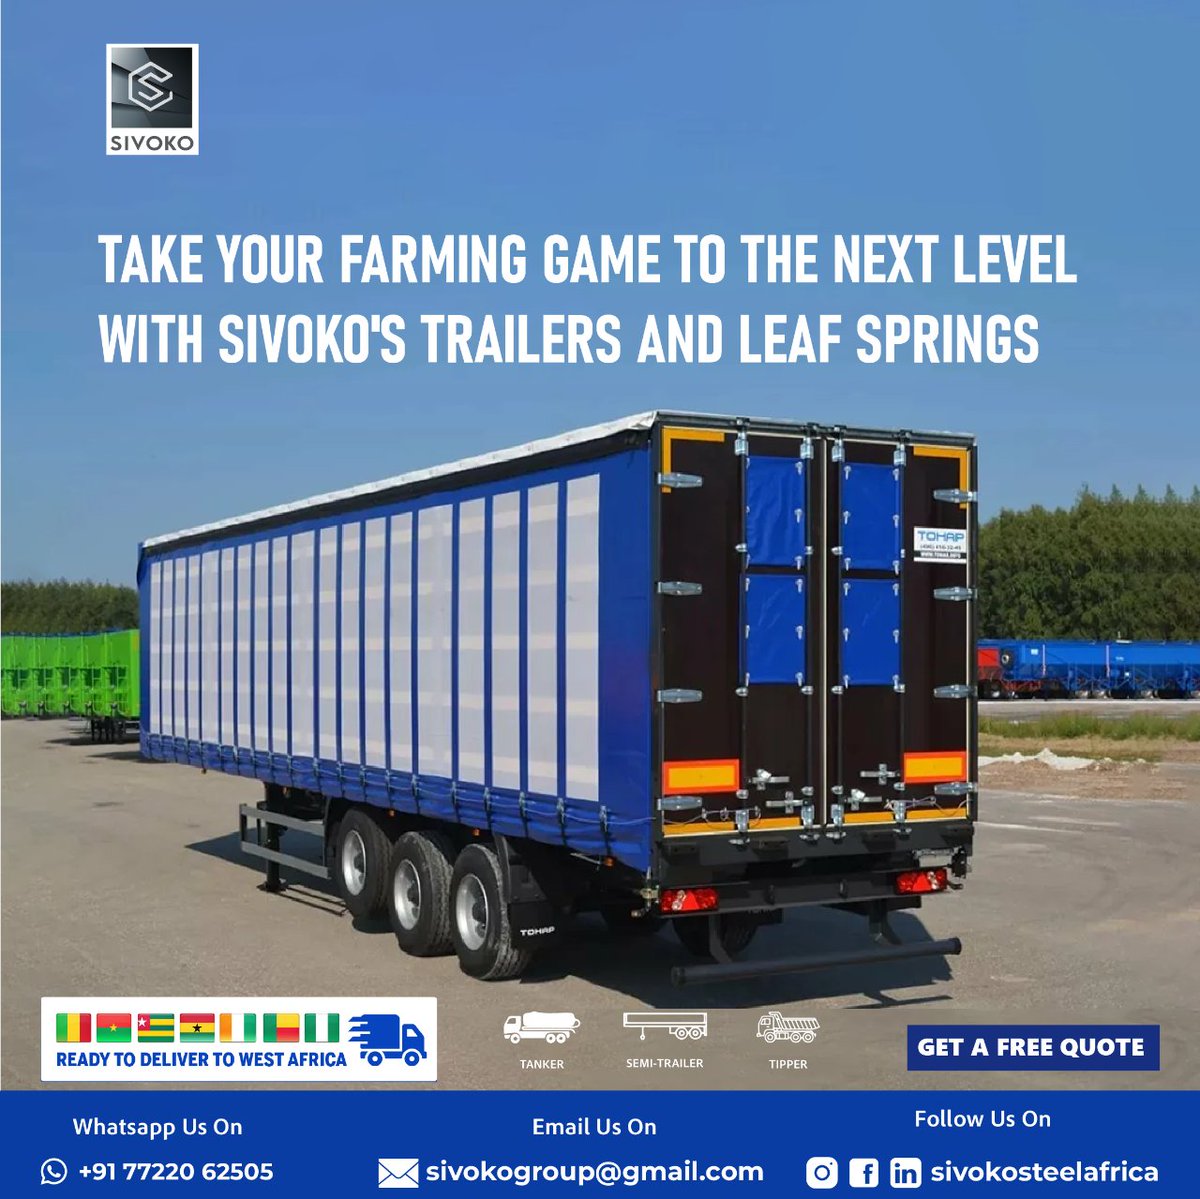 Trailers and Quality Spare Parts - Empowering Smooth Travels, Bolt by Bolt.

Whatsapp us: +917722062505
Email us: Sivokogroup@gmail.com

#sivokoflatbedtrailers #transportationsolutions #heavydutyhauling #versatiletrailers #reliabletransport #efficientlogistics